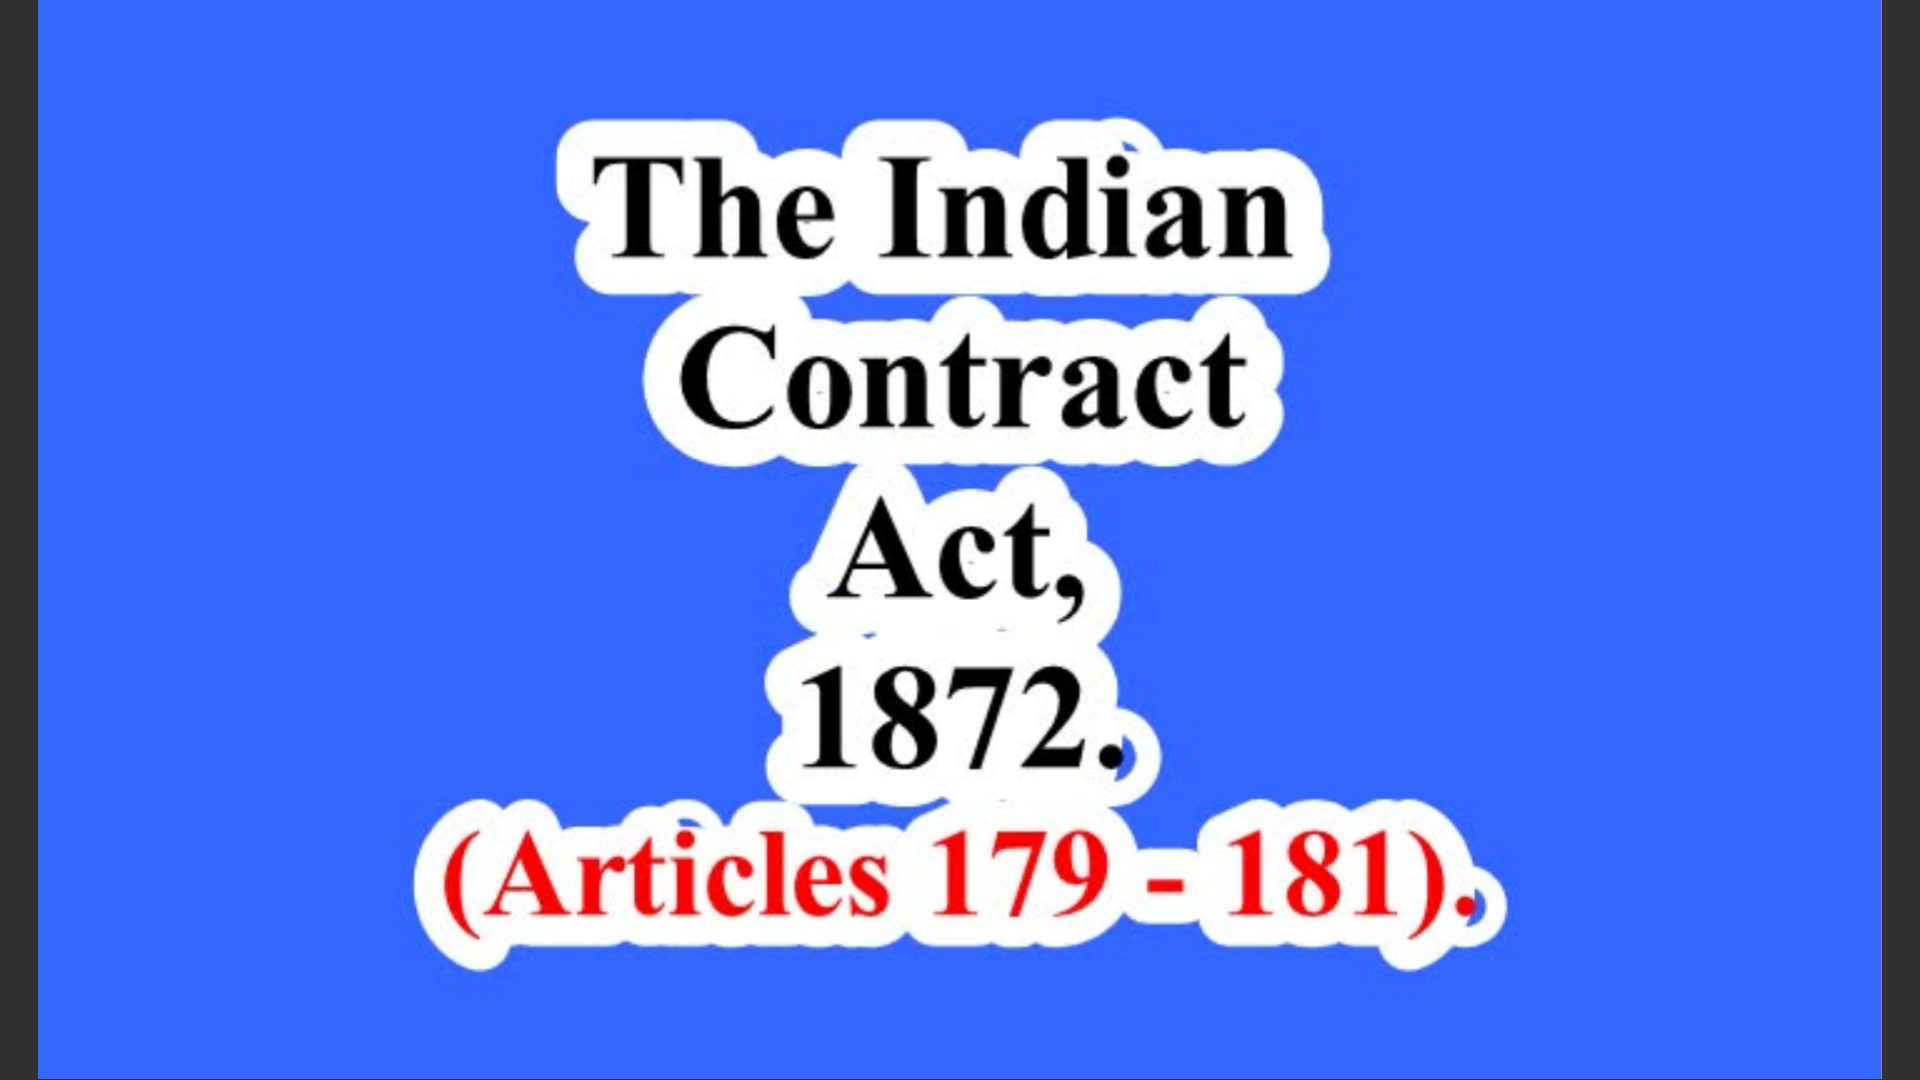 The Indian Contract Act, 1872. (Articles 179 – 181).